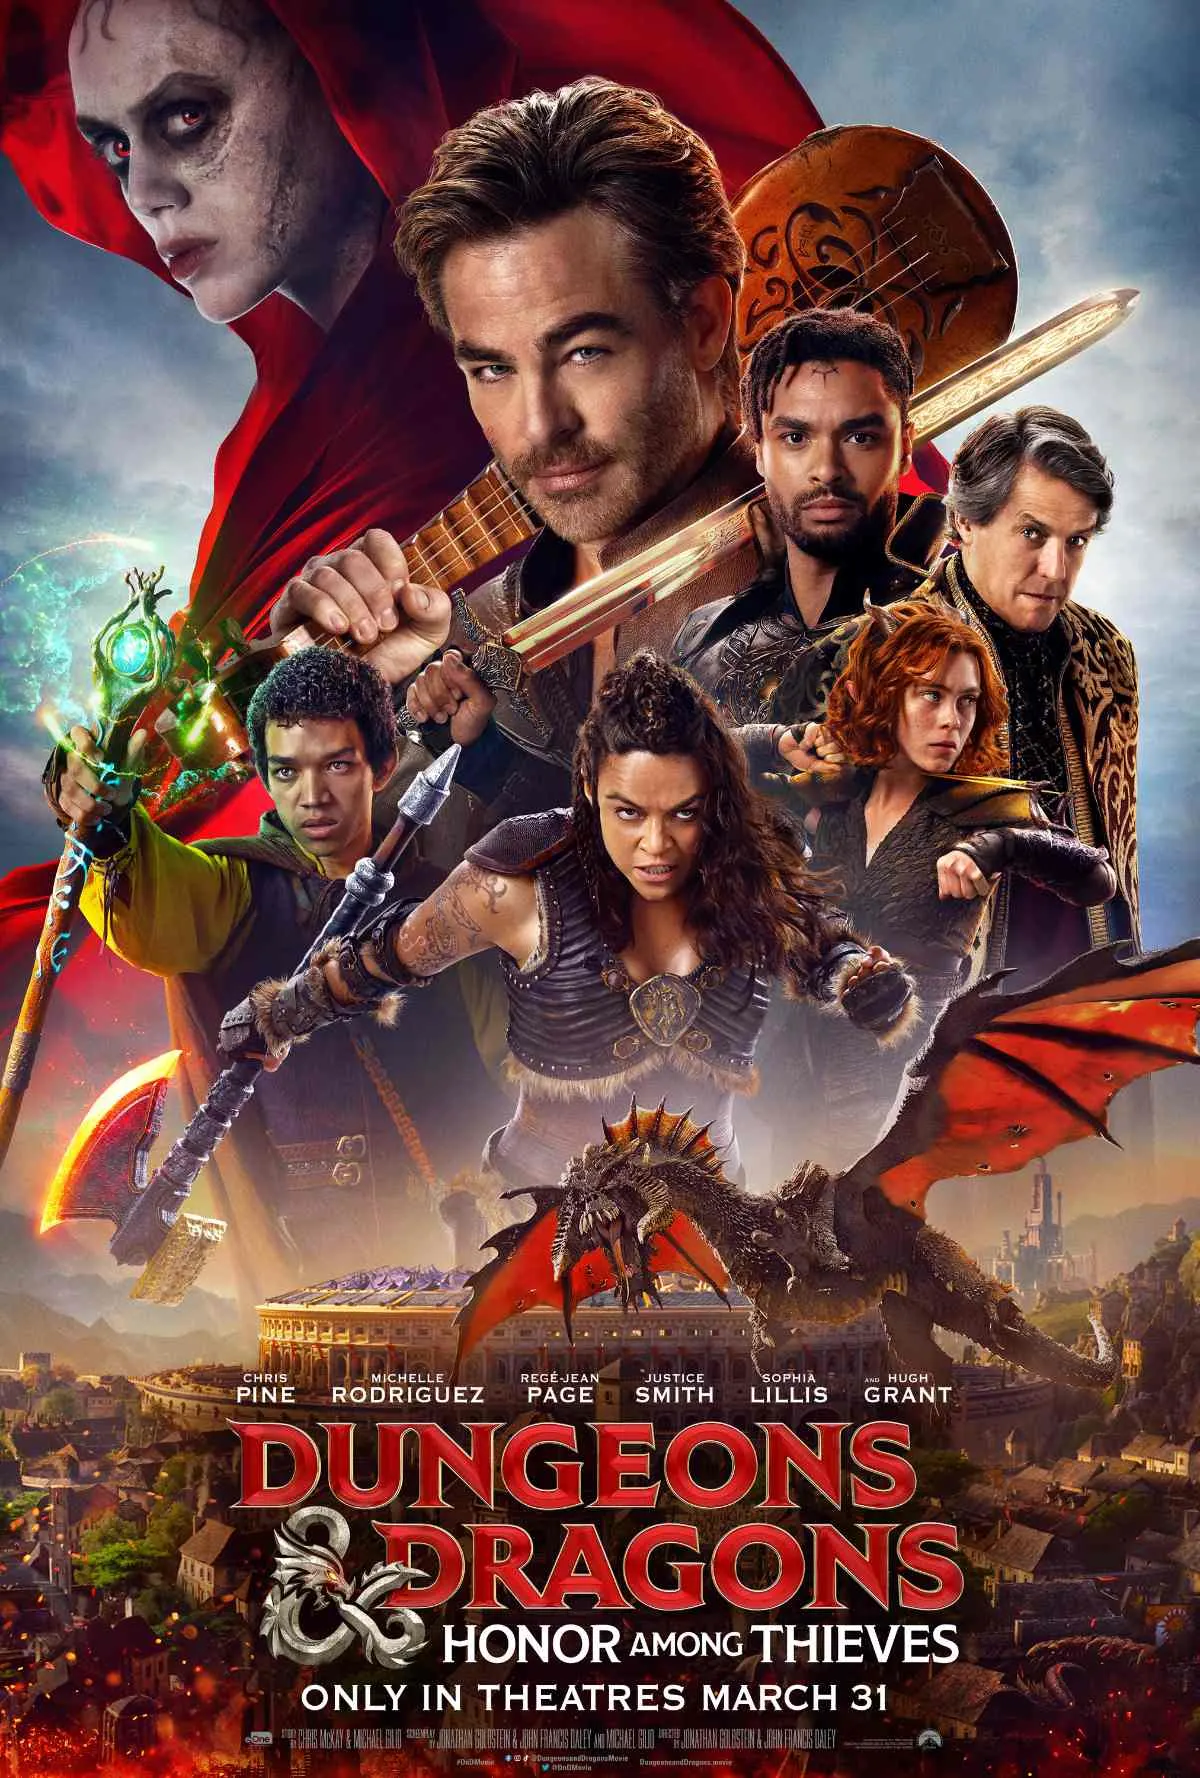 Dungeons & Dragons: Honor Among Thieves Poster and Featurette